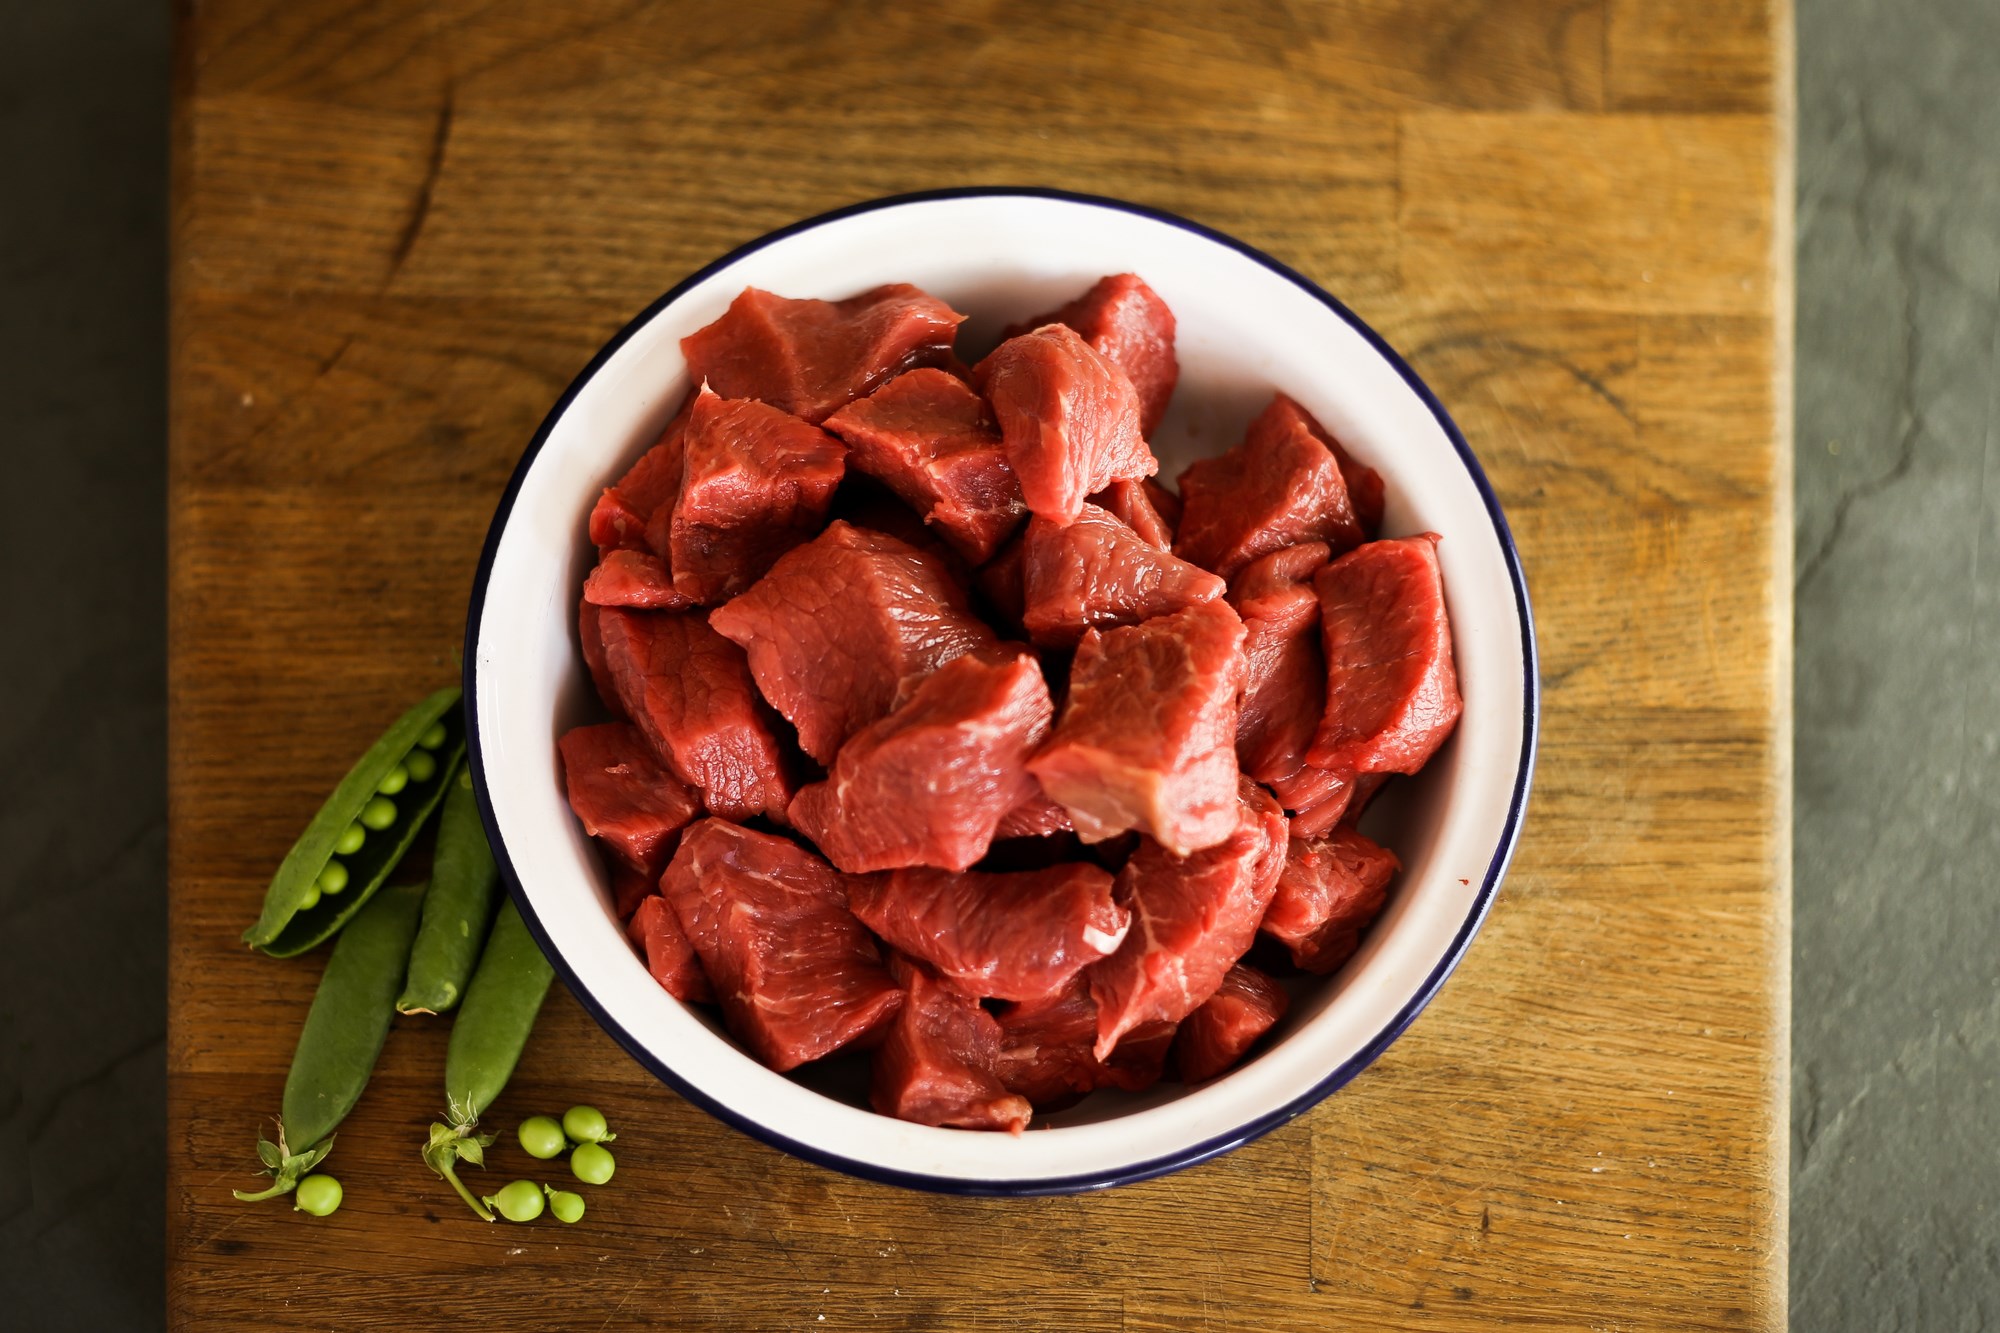 Diced Beef - 220g